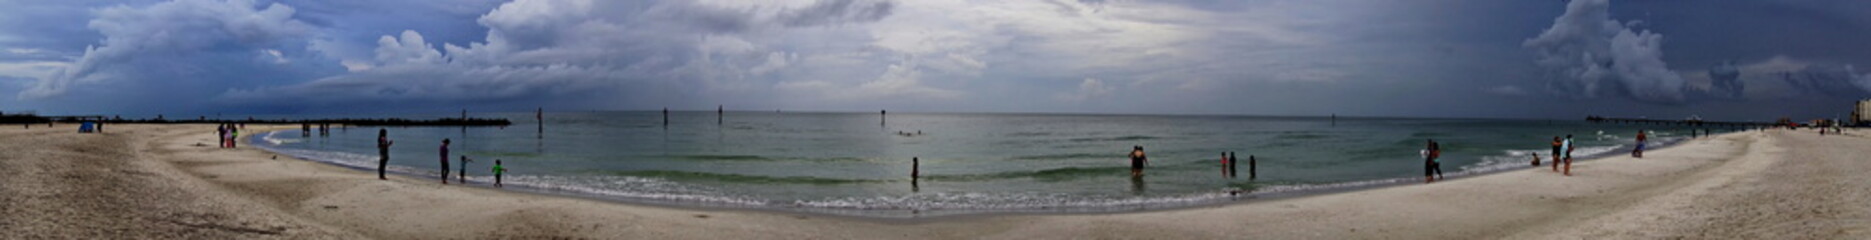 Panorama of the beach at Clearwater Florida